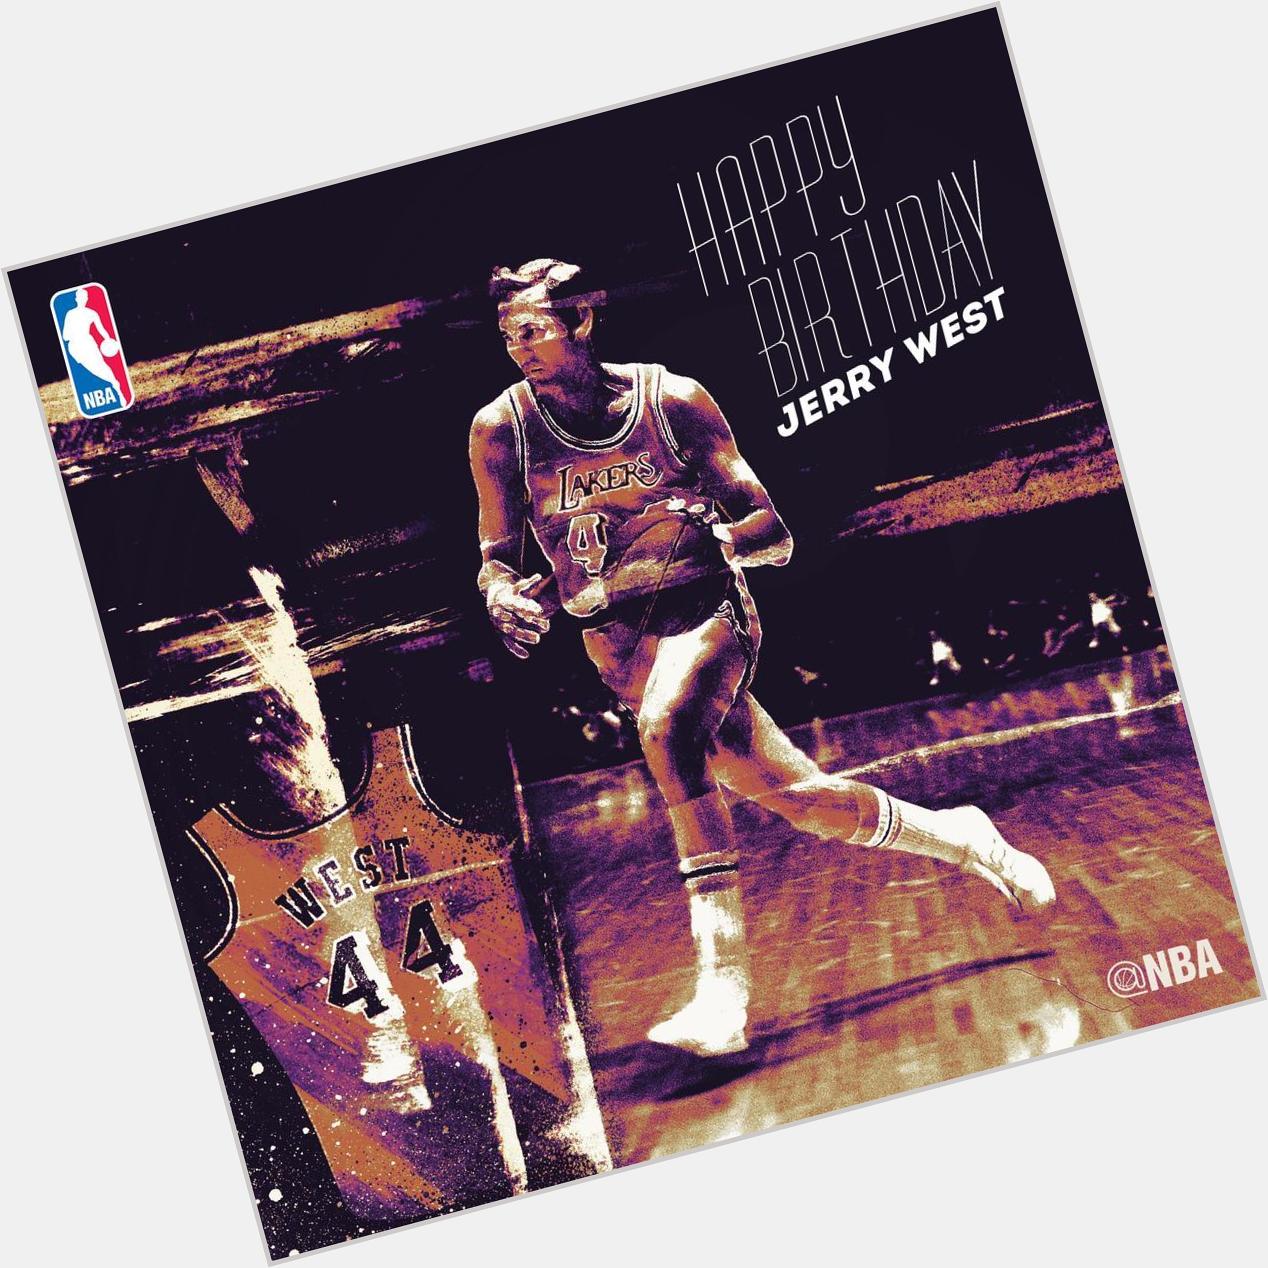 NBA : Join us in wishing NBA legend JERRY WEST a HAPPY BIRTHDAY! 